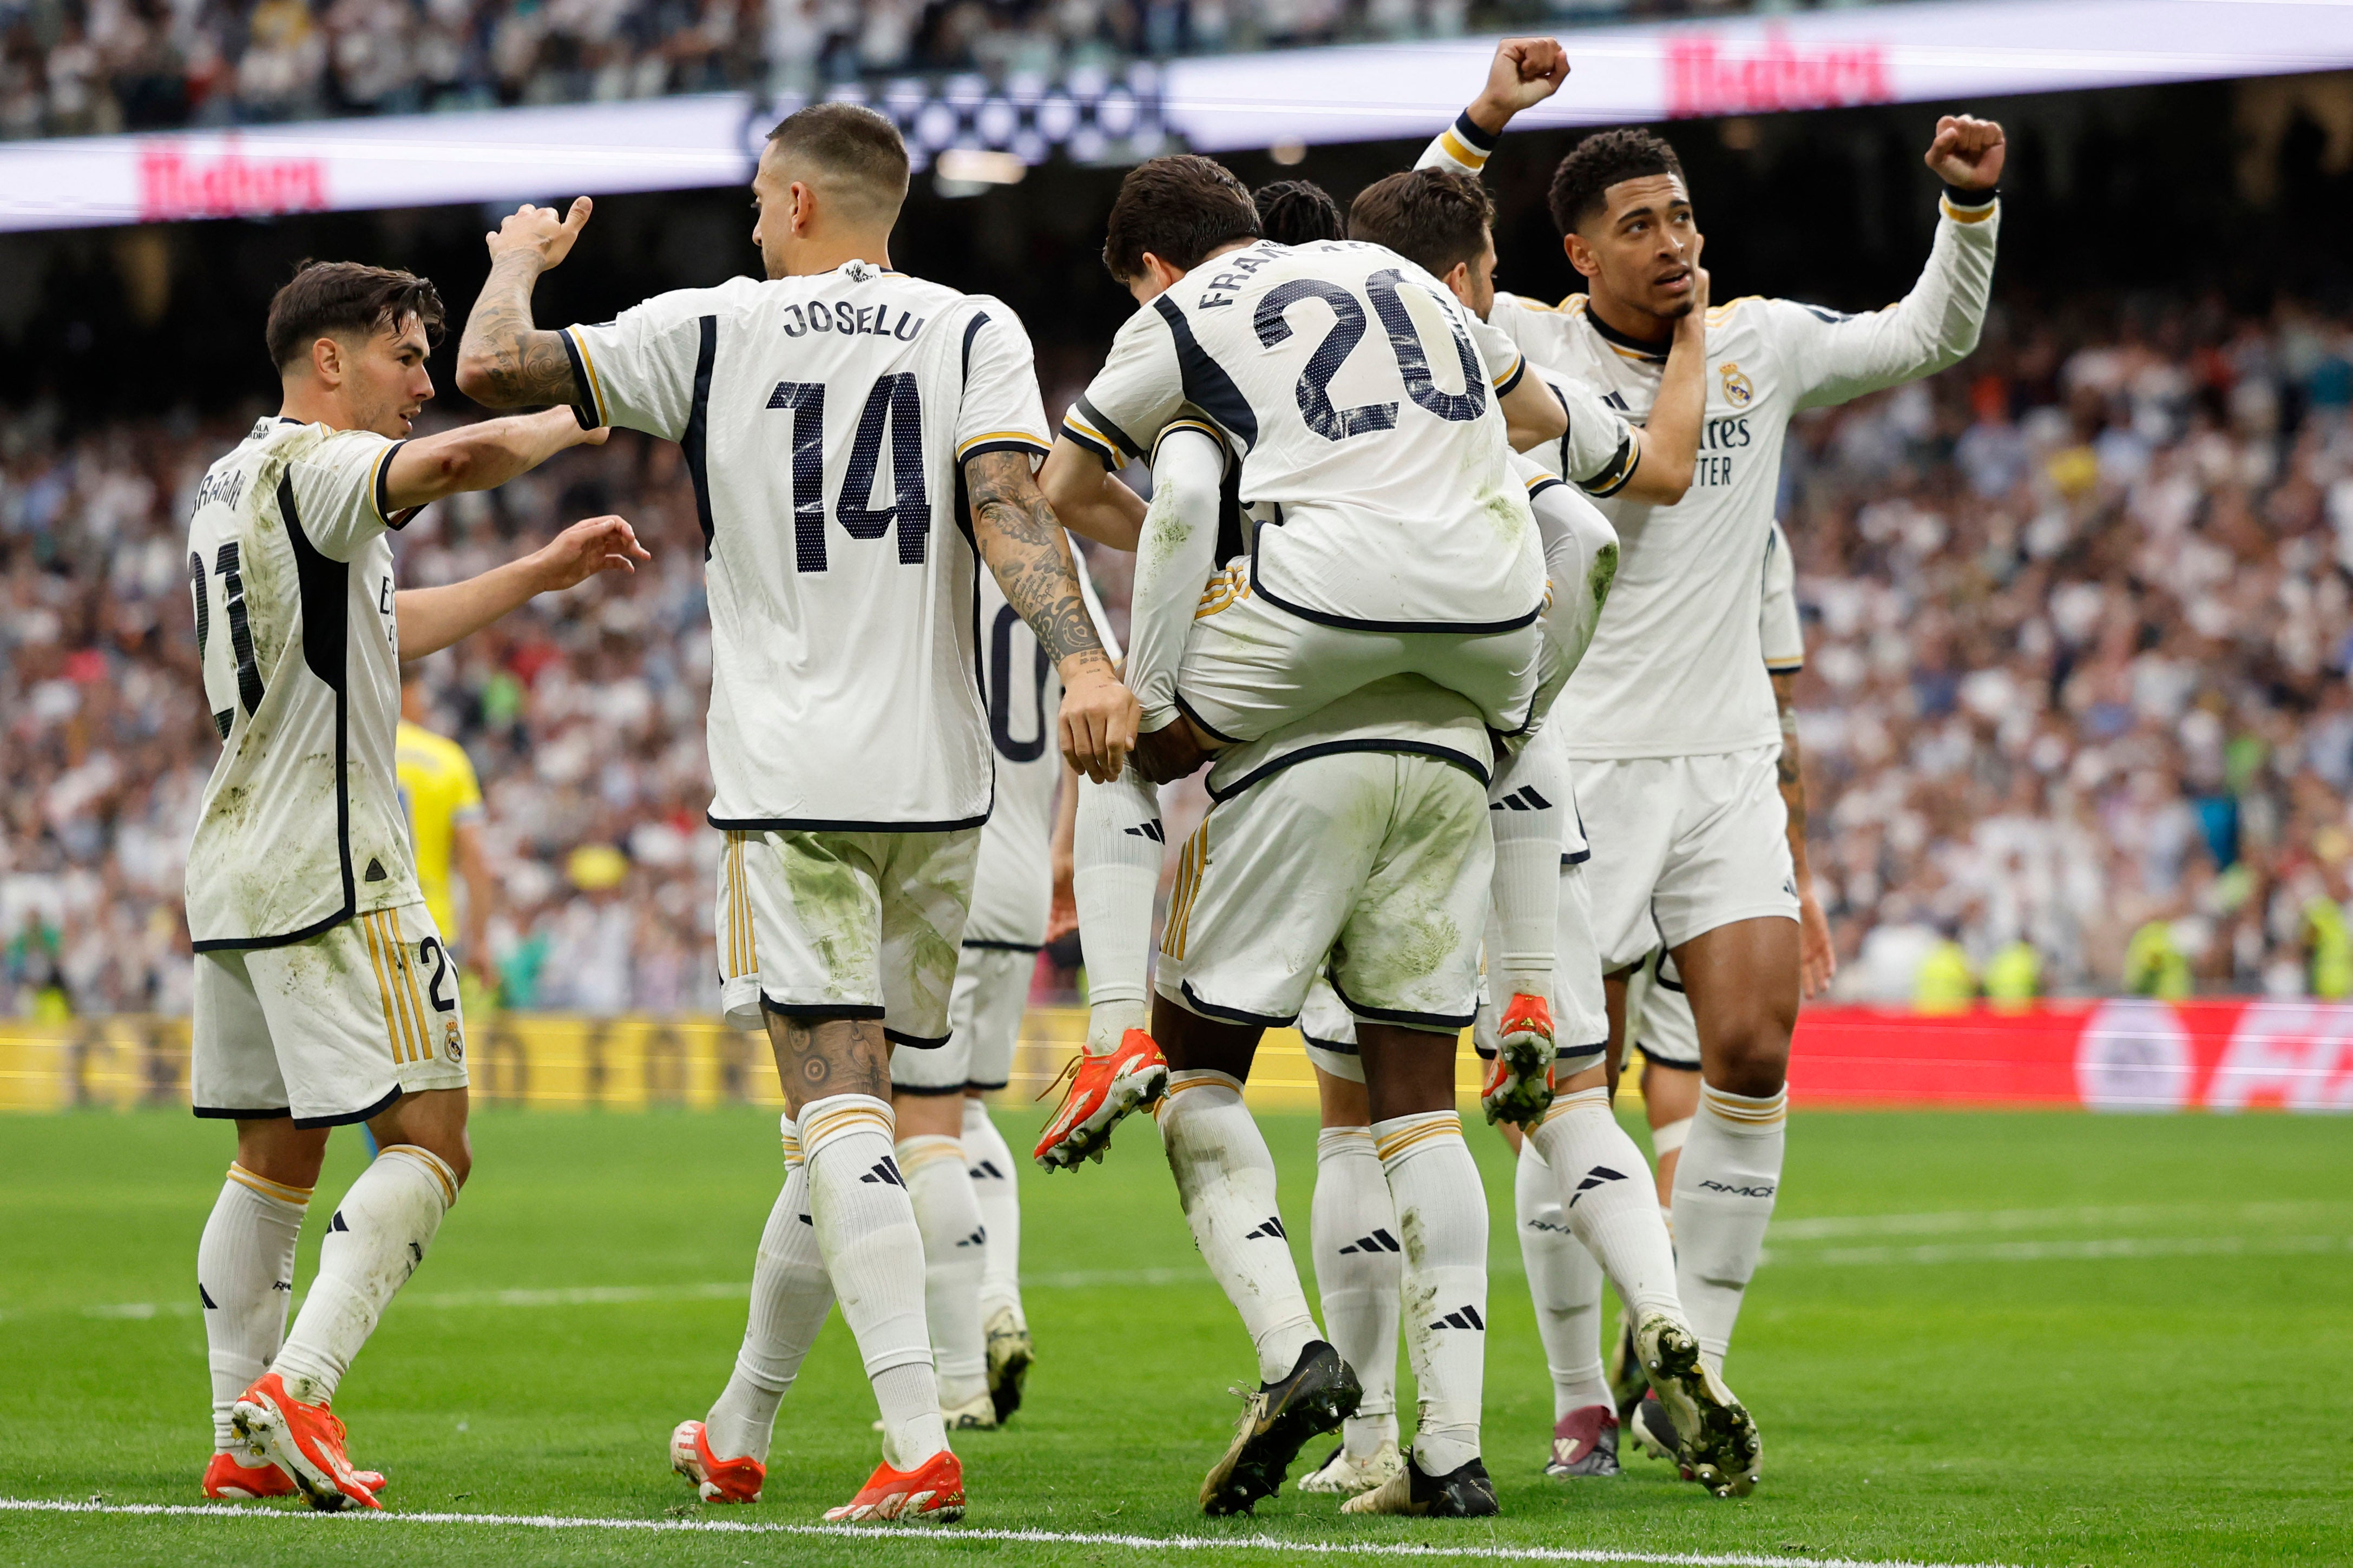 Real Madrid’s three goals proved enough against Cadiz.